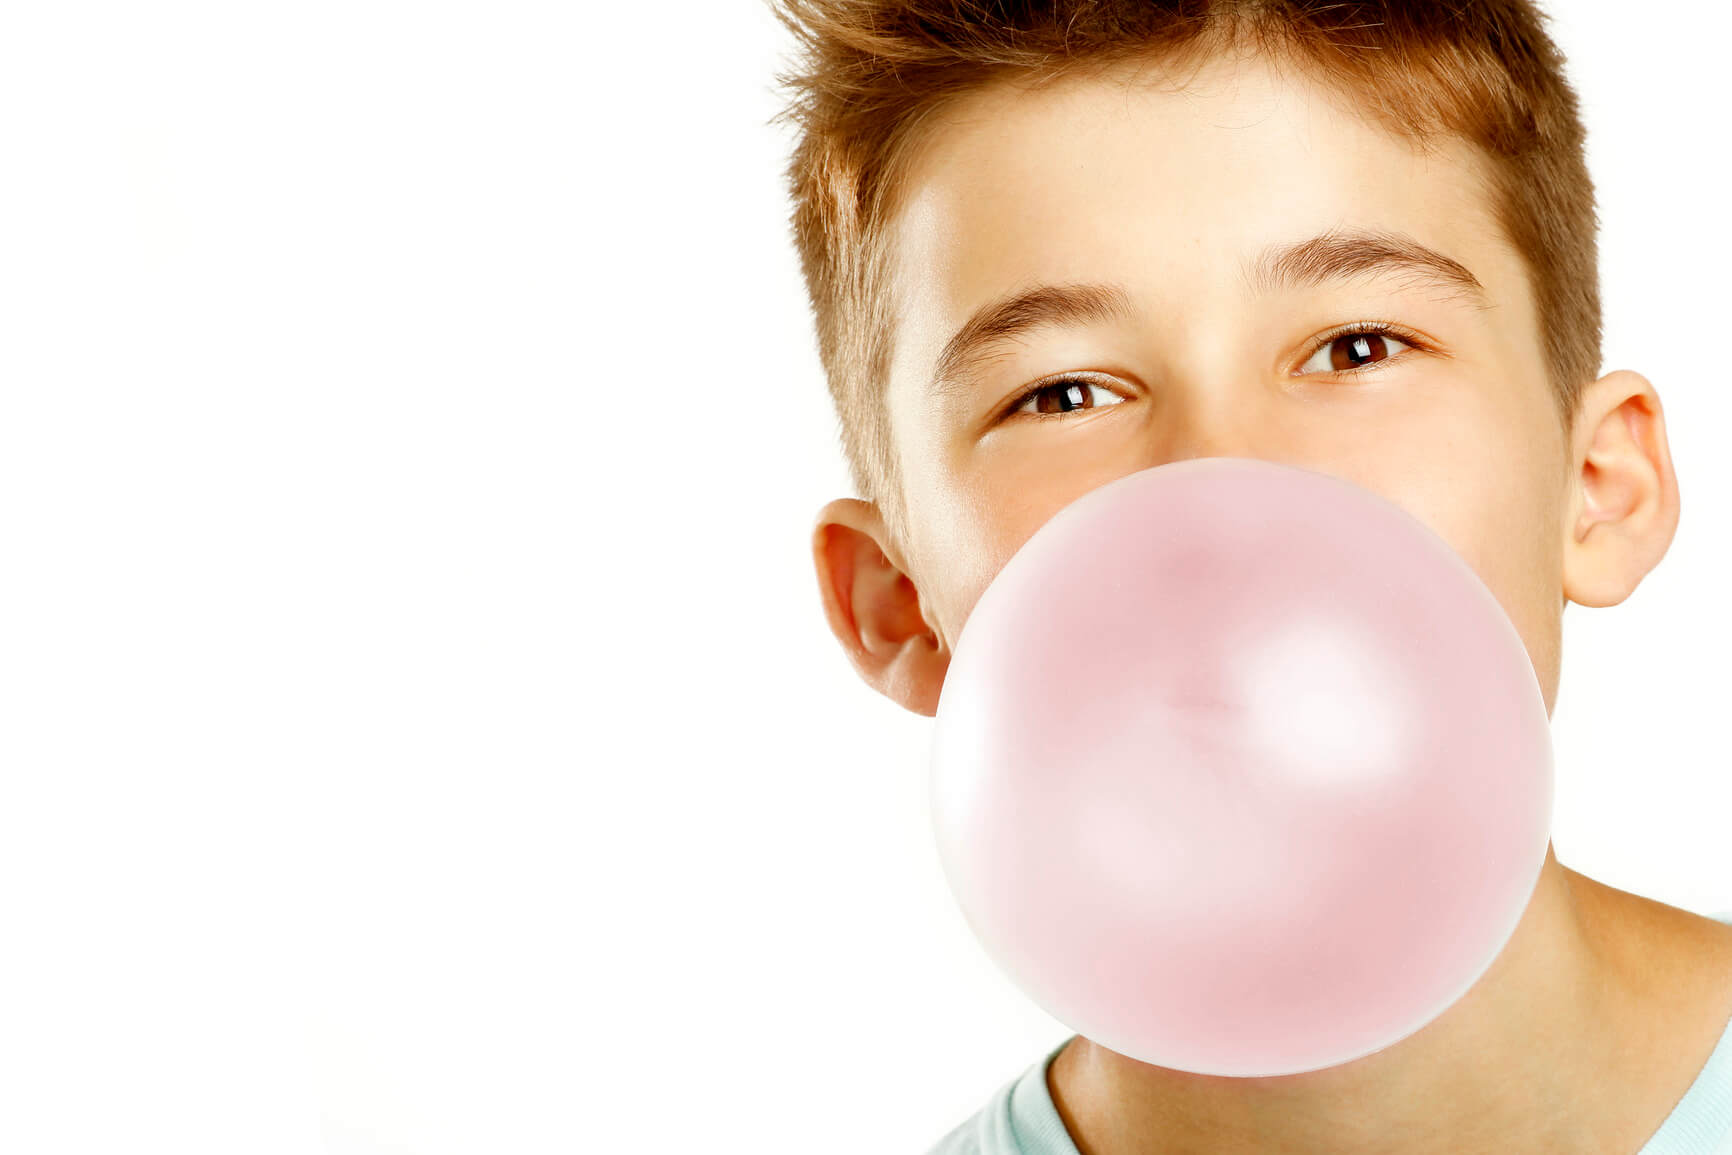 Chewing Gum: Good or Bad?